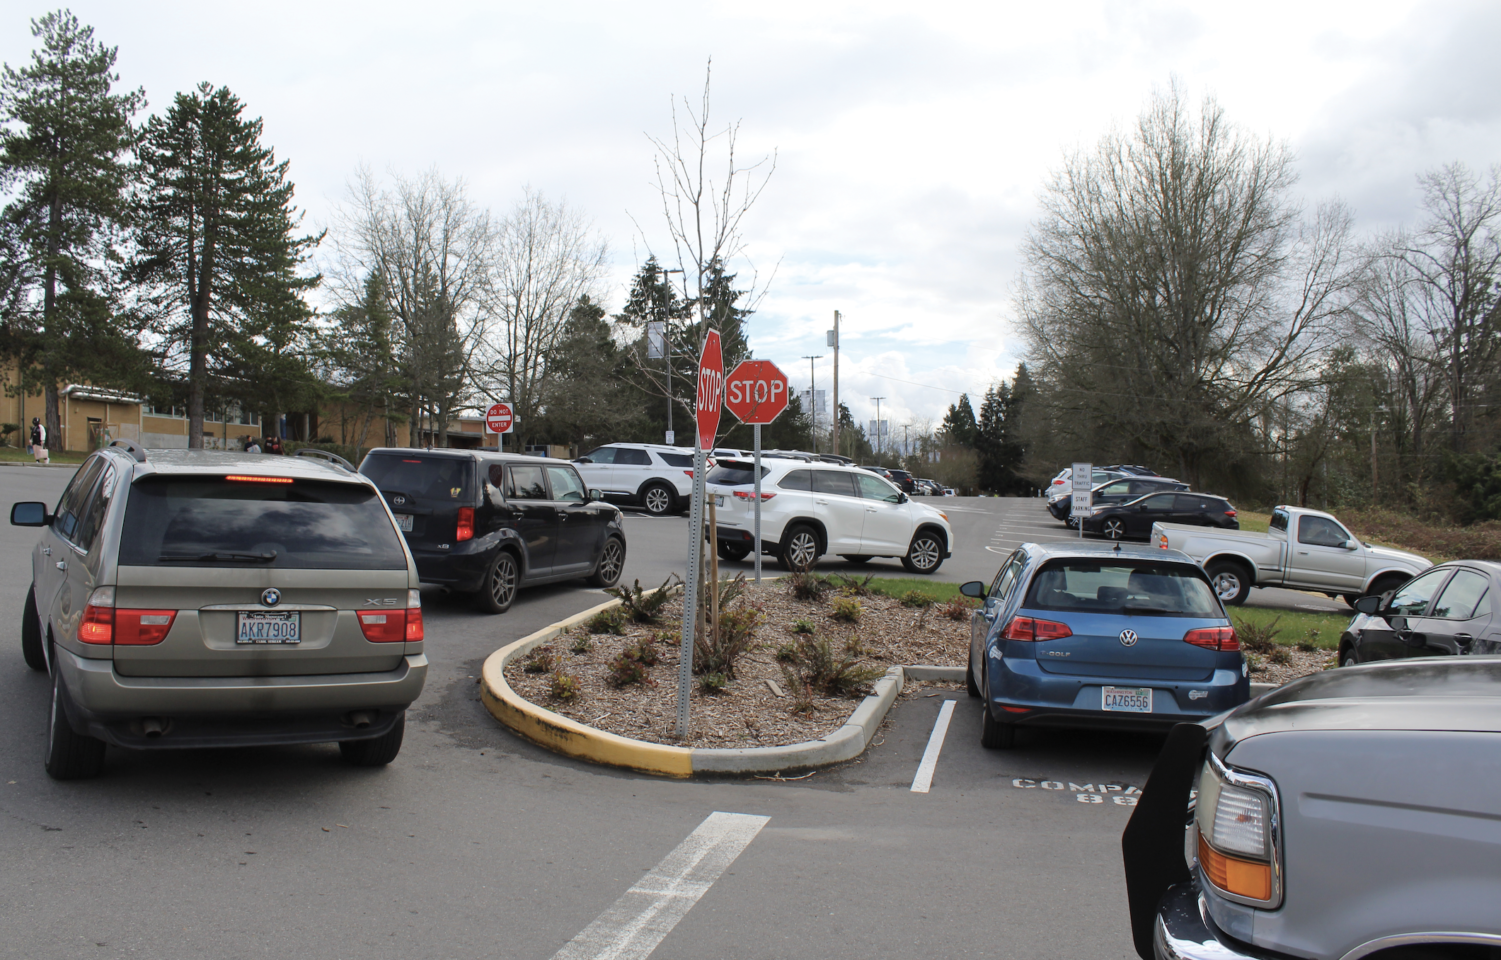 A+line+of+students%E2%80%99+cars+leaving+parking+lot+C+to+88th+Ave.+NE%2C+one+of+Inglemoor%E2%80%99s+two+exits%2C+at+3%3A24+p.m..+This+parking+lot+and+exit+has+only+stop+signs+to+direct+traffic+flow%2C+which+leads+to+congested+roads.